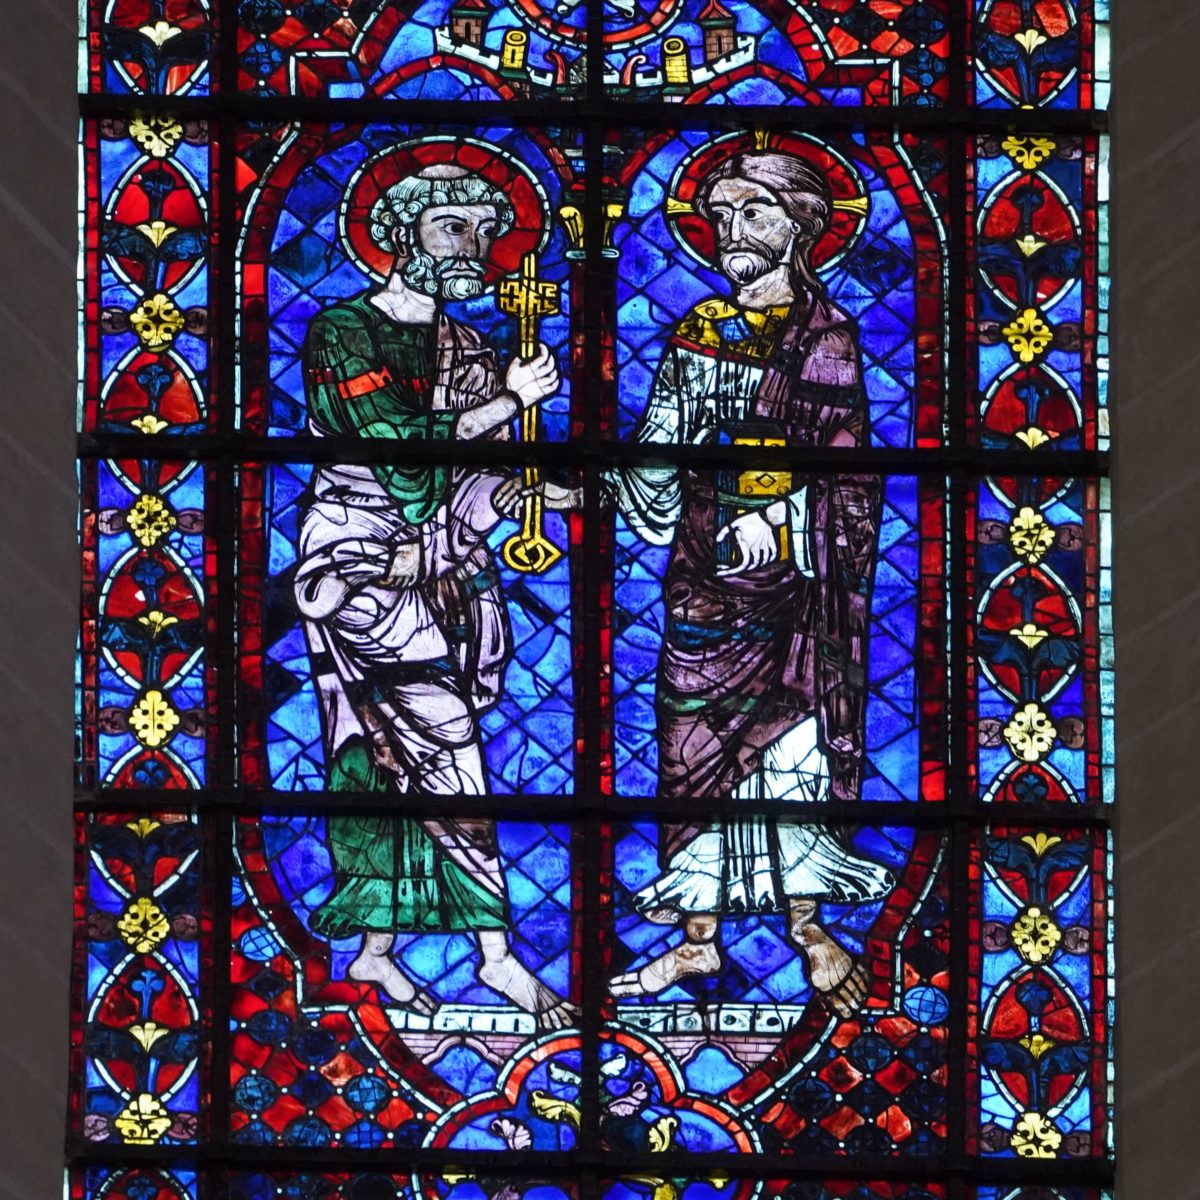 Chartres stained glass